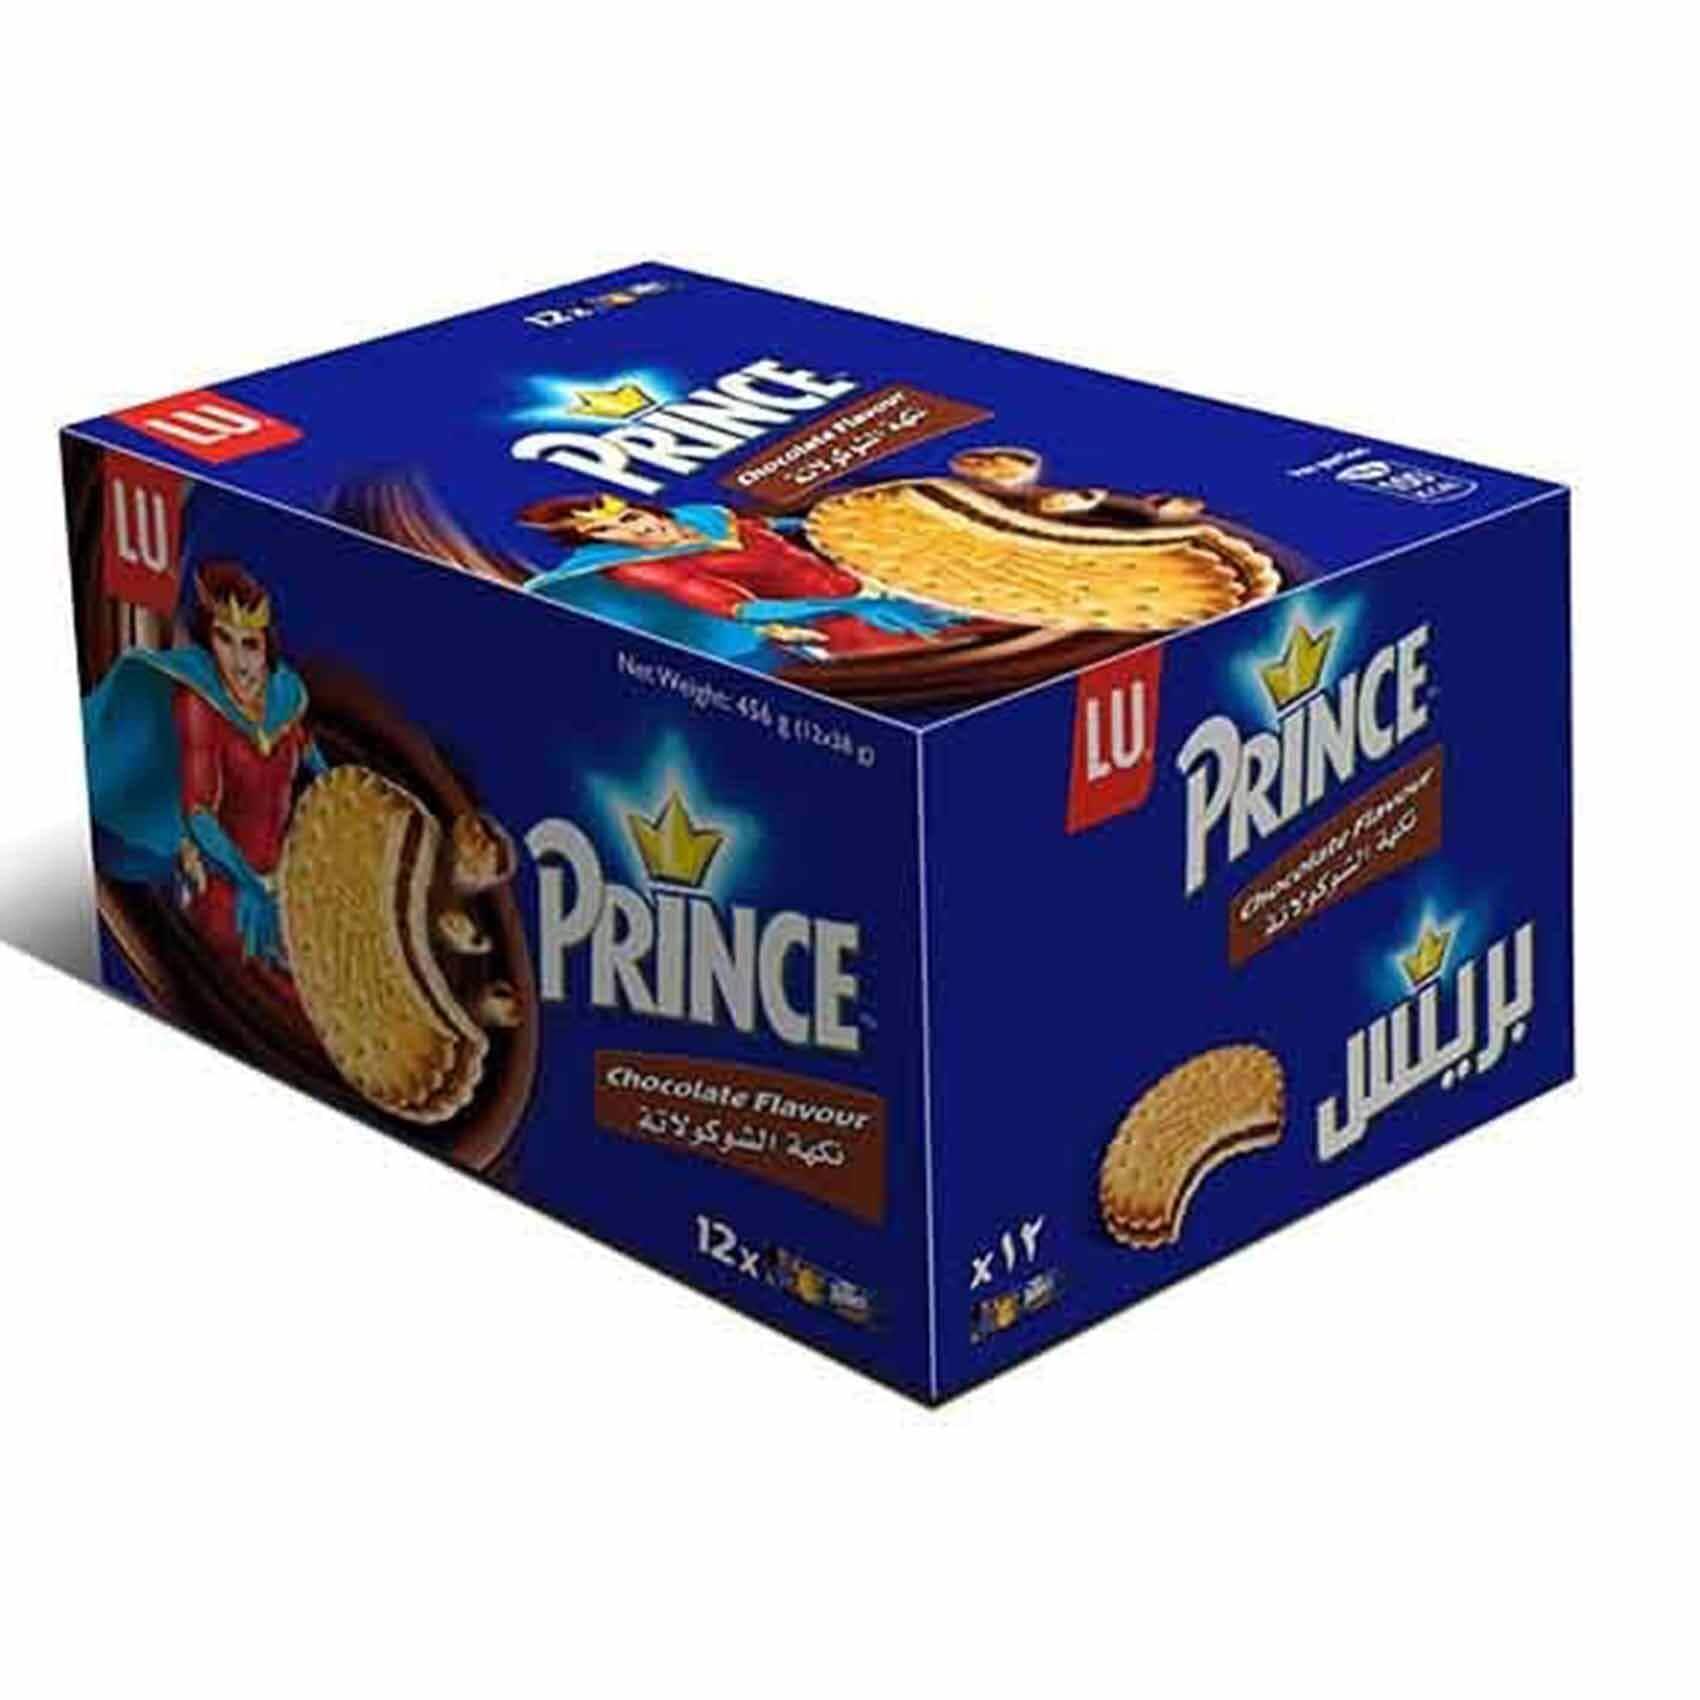 14 Pieces X Lu Choco Prince Biscuit (28.5g)